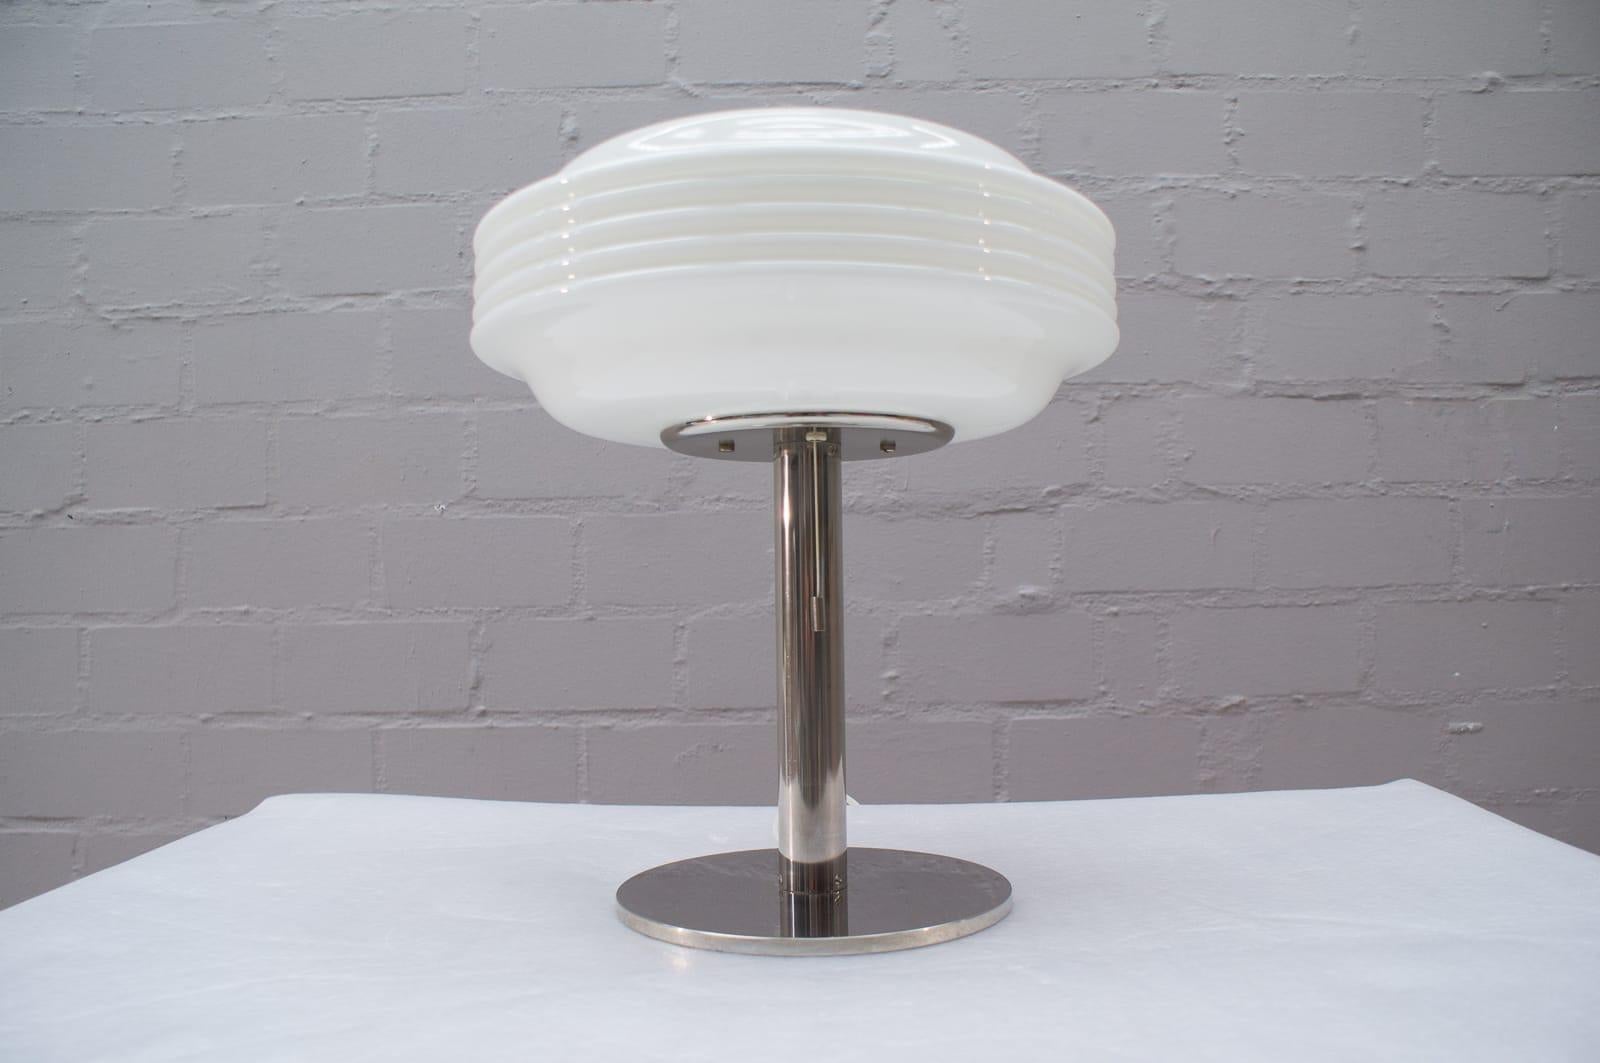 Swiss Space Age Table Lamp by Temde Leuchten, Switzerland, 1970s For Sale